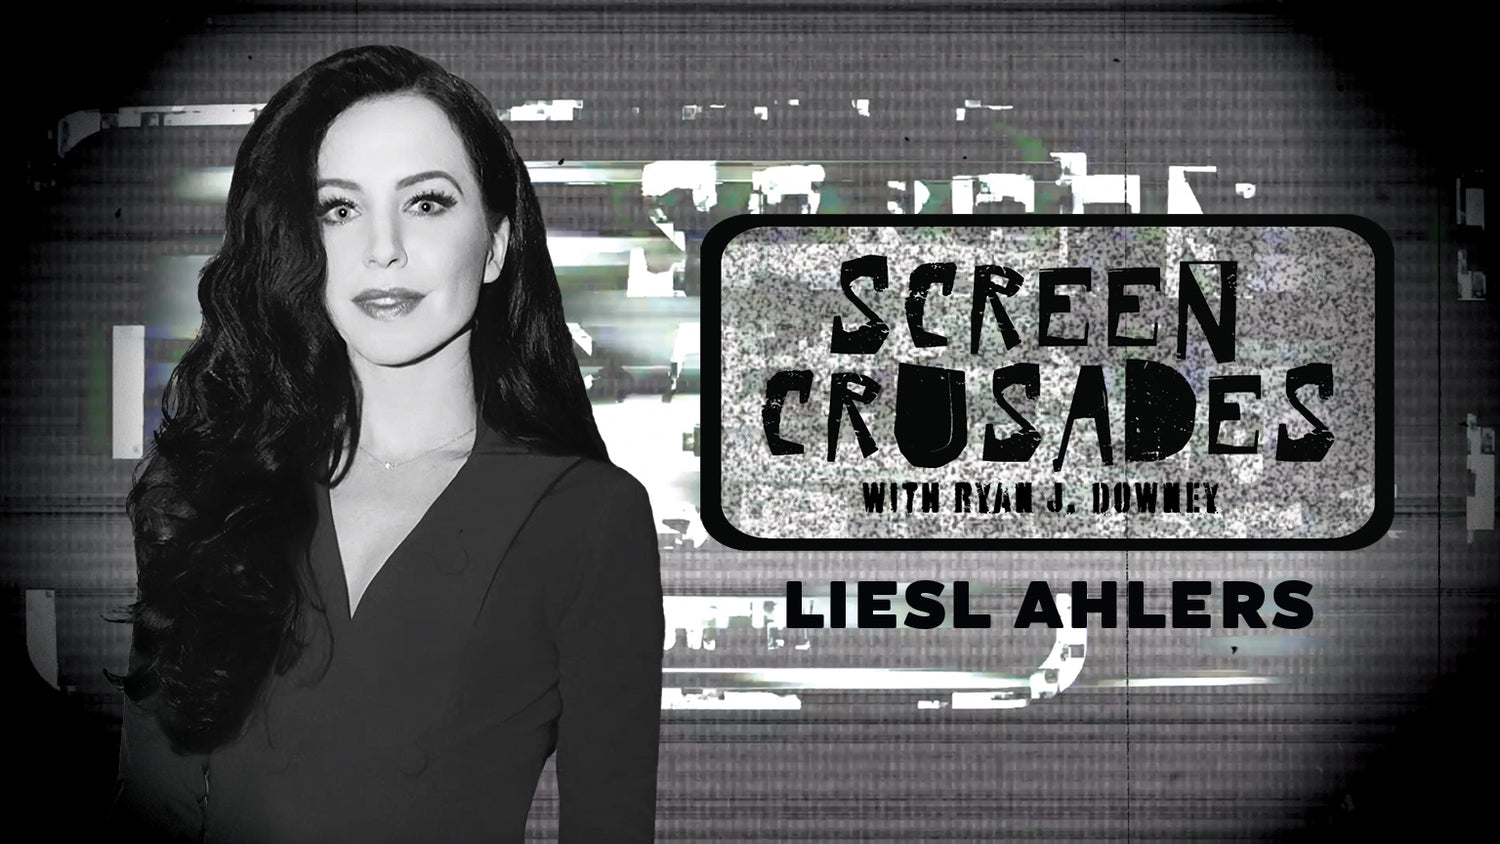 Liesl Ahlers dissects the high stakes of life and death on Screen Crusades